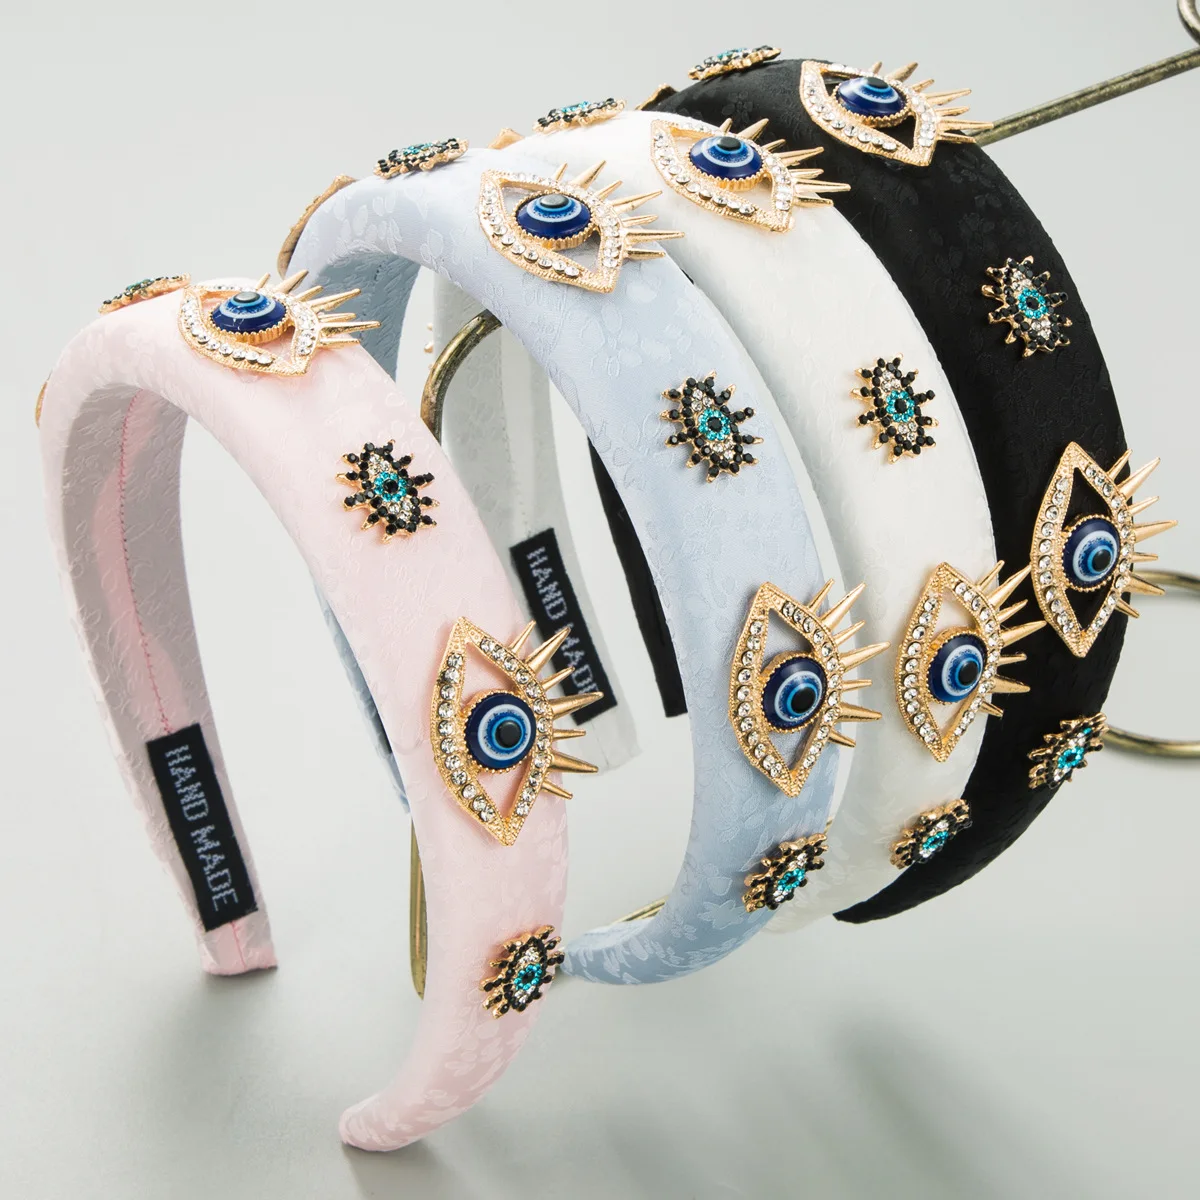 European and American Retro Printed Fabric Alloy Diamond-Embedded Devil's Eyes Headband Female Sponge Hair Accessories magnetic print 310 310mm heat hot bed sticker coordinate printed hot bed surface sticker blue for 3d printer accessories